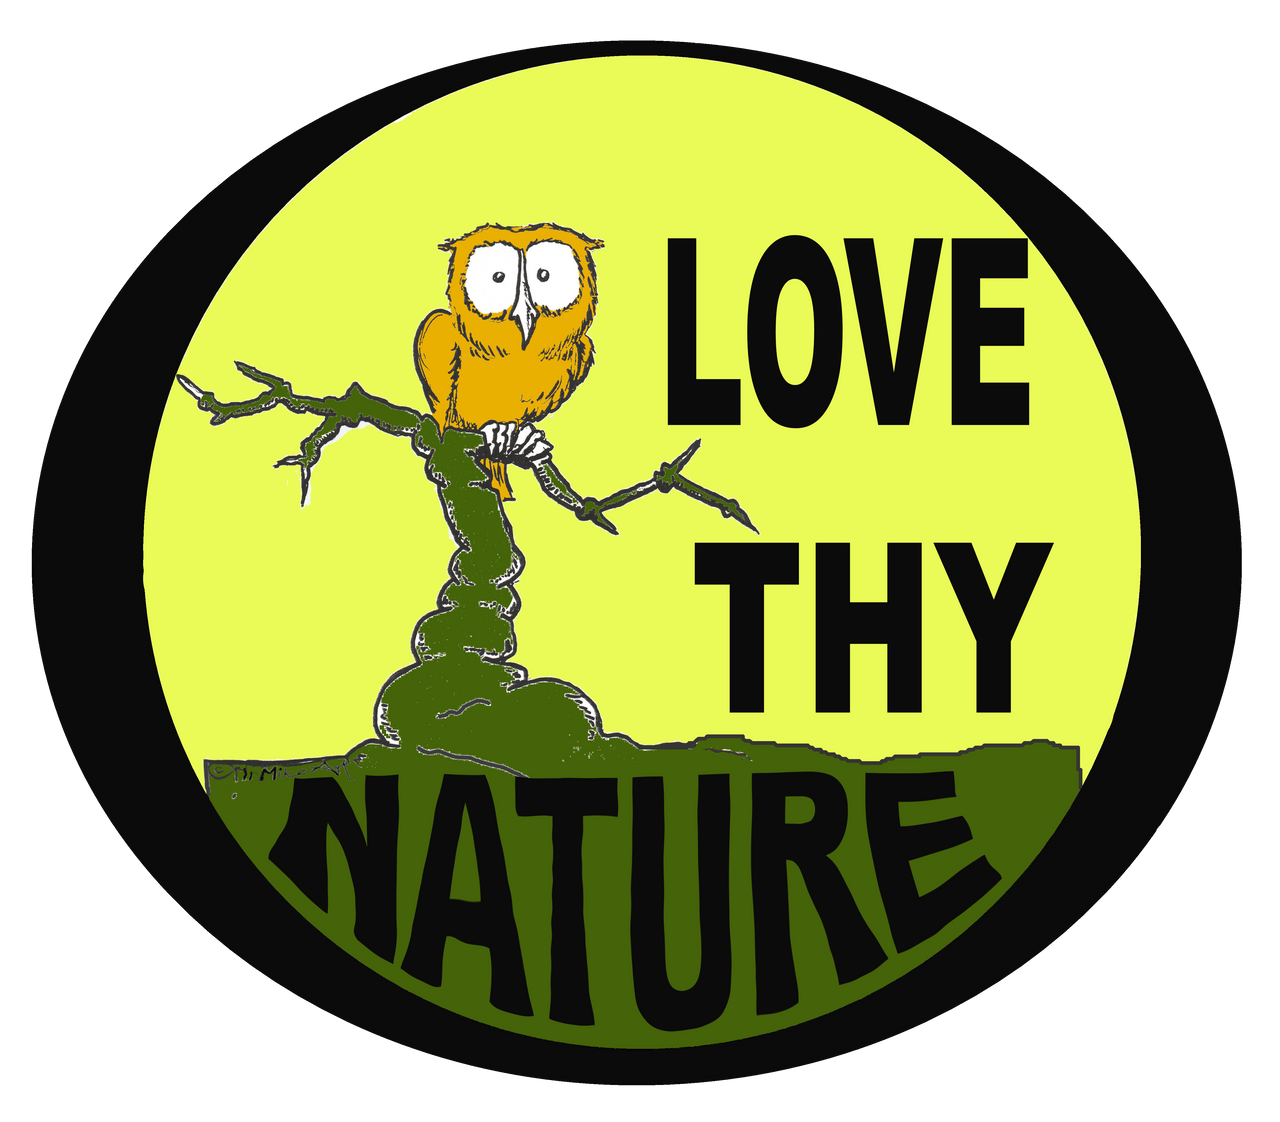 dækning Glimte paraply 02 Owl Love Thy Nature crittercontest by MrMikeART on DeviantArt